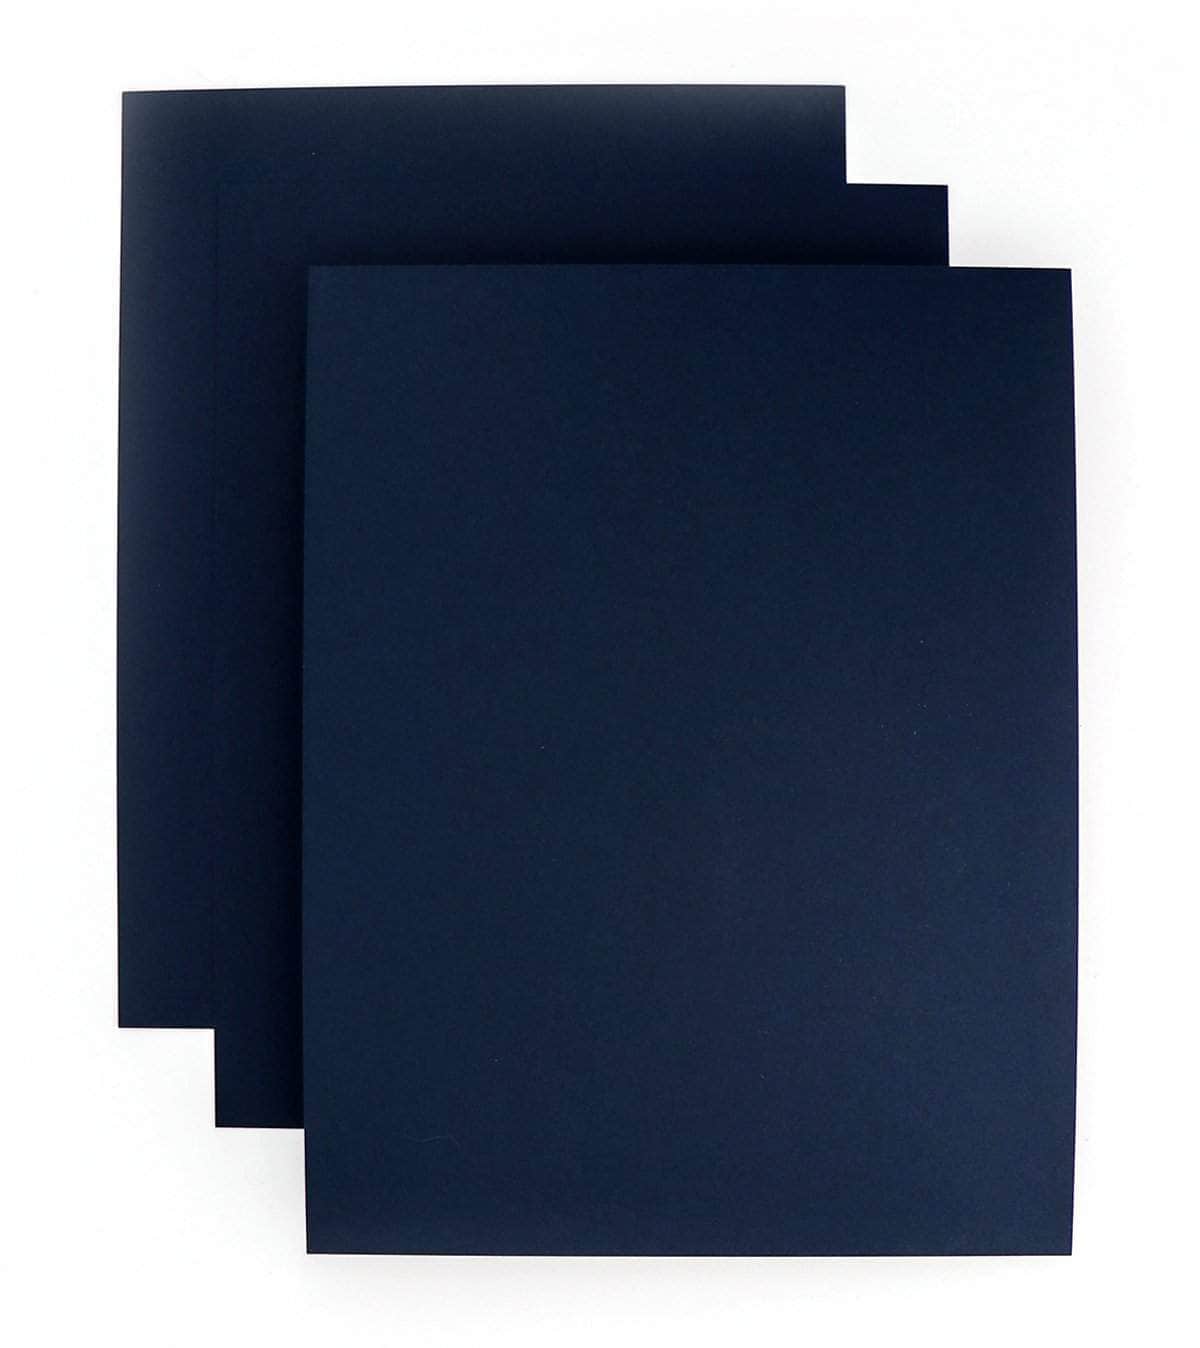 19 x 13 Cardstock for Event Signage, Certificates & More